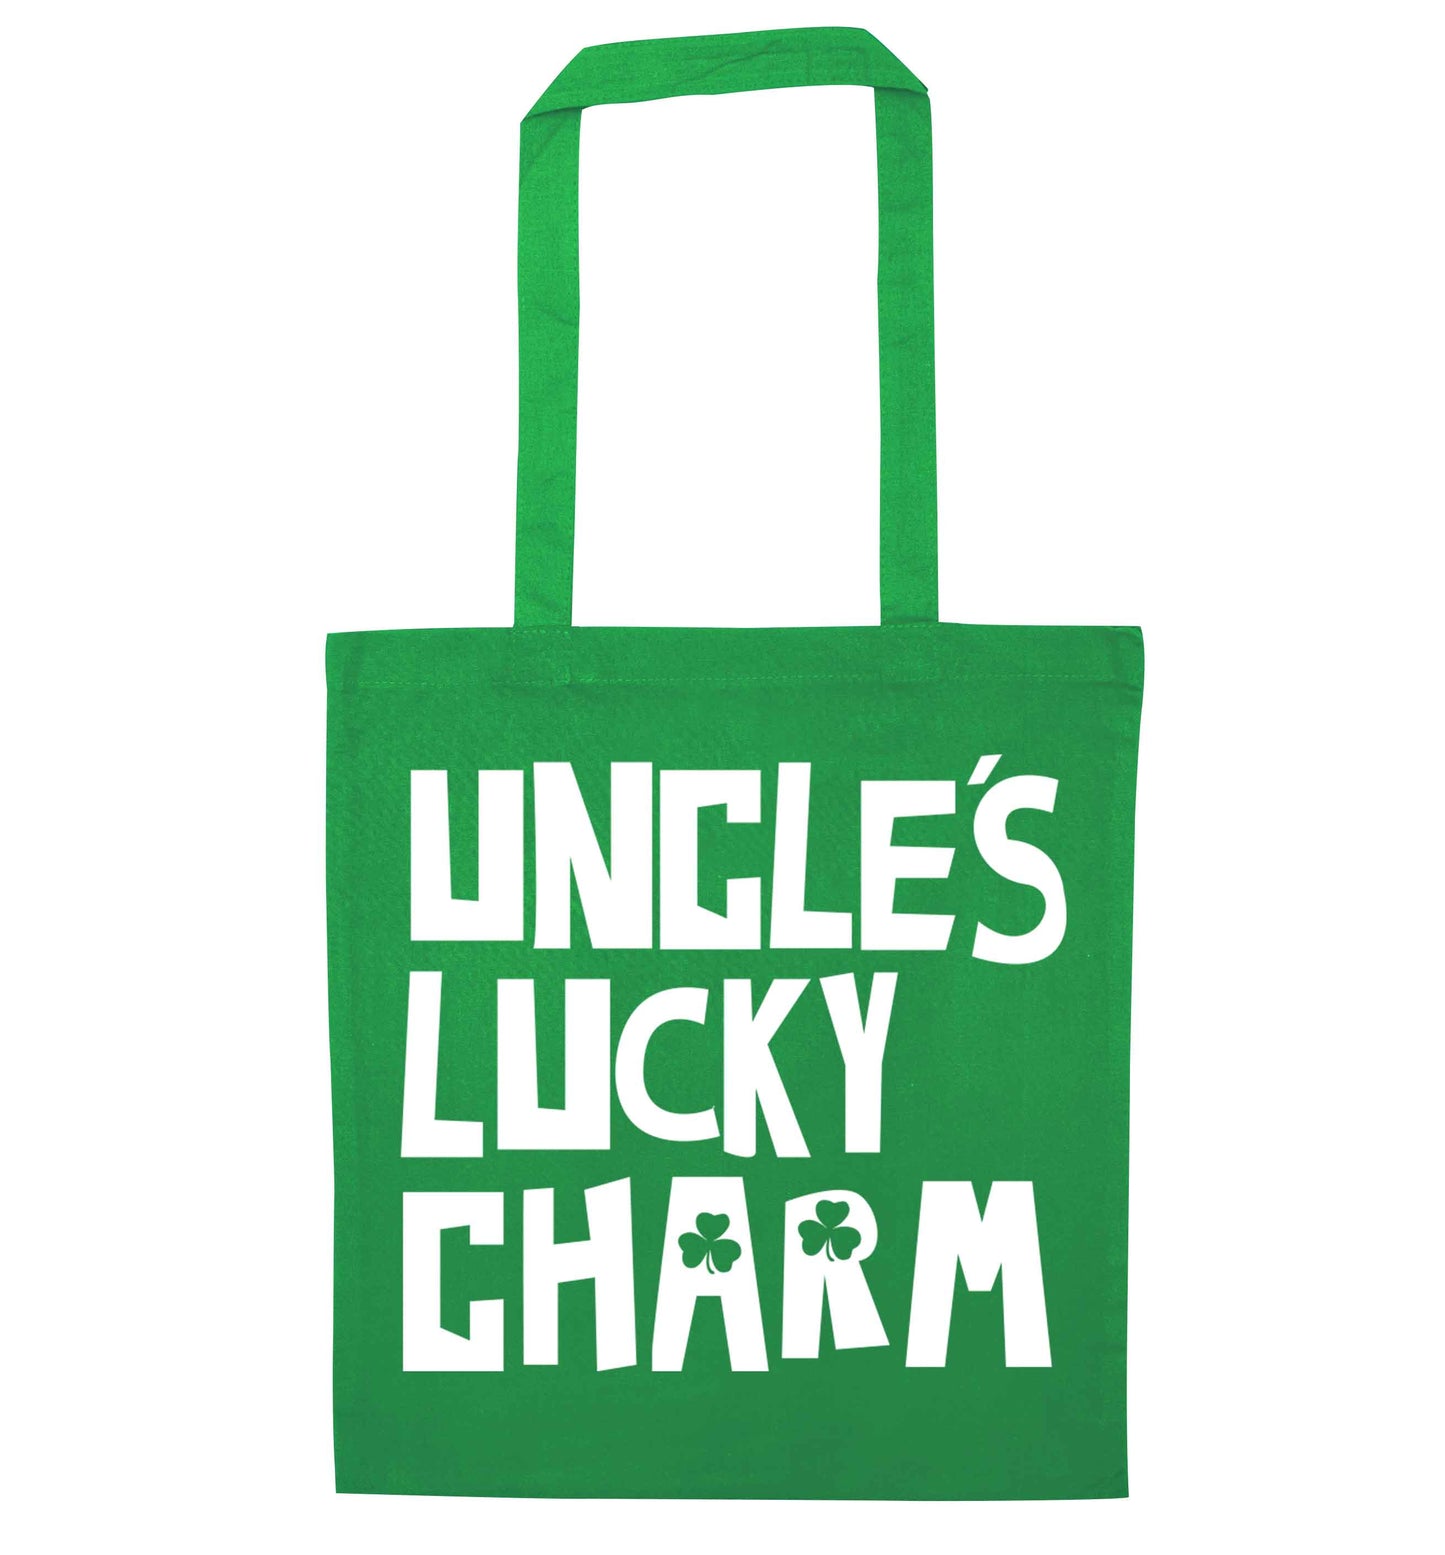 Uncles lucky charm green tote bag